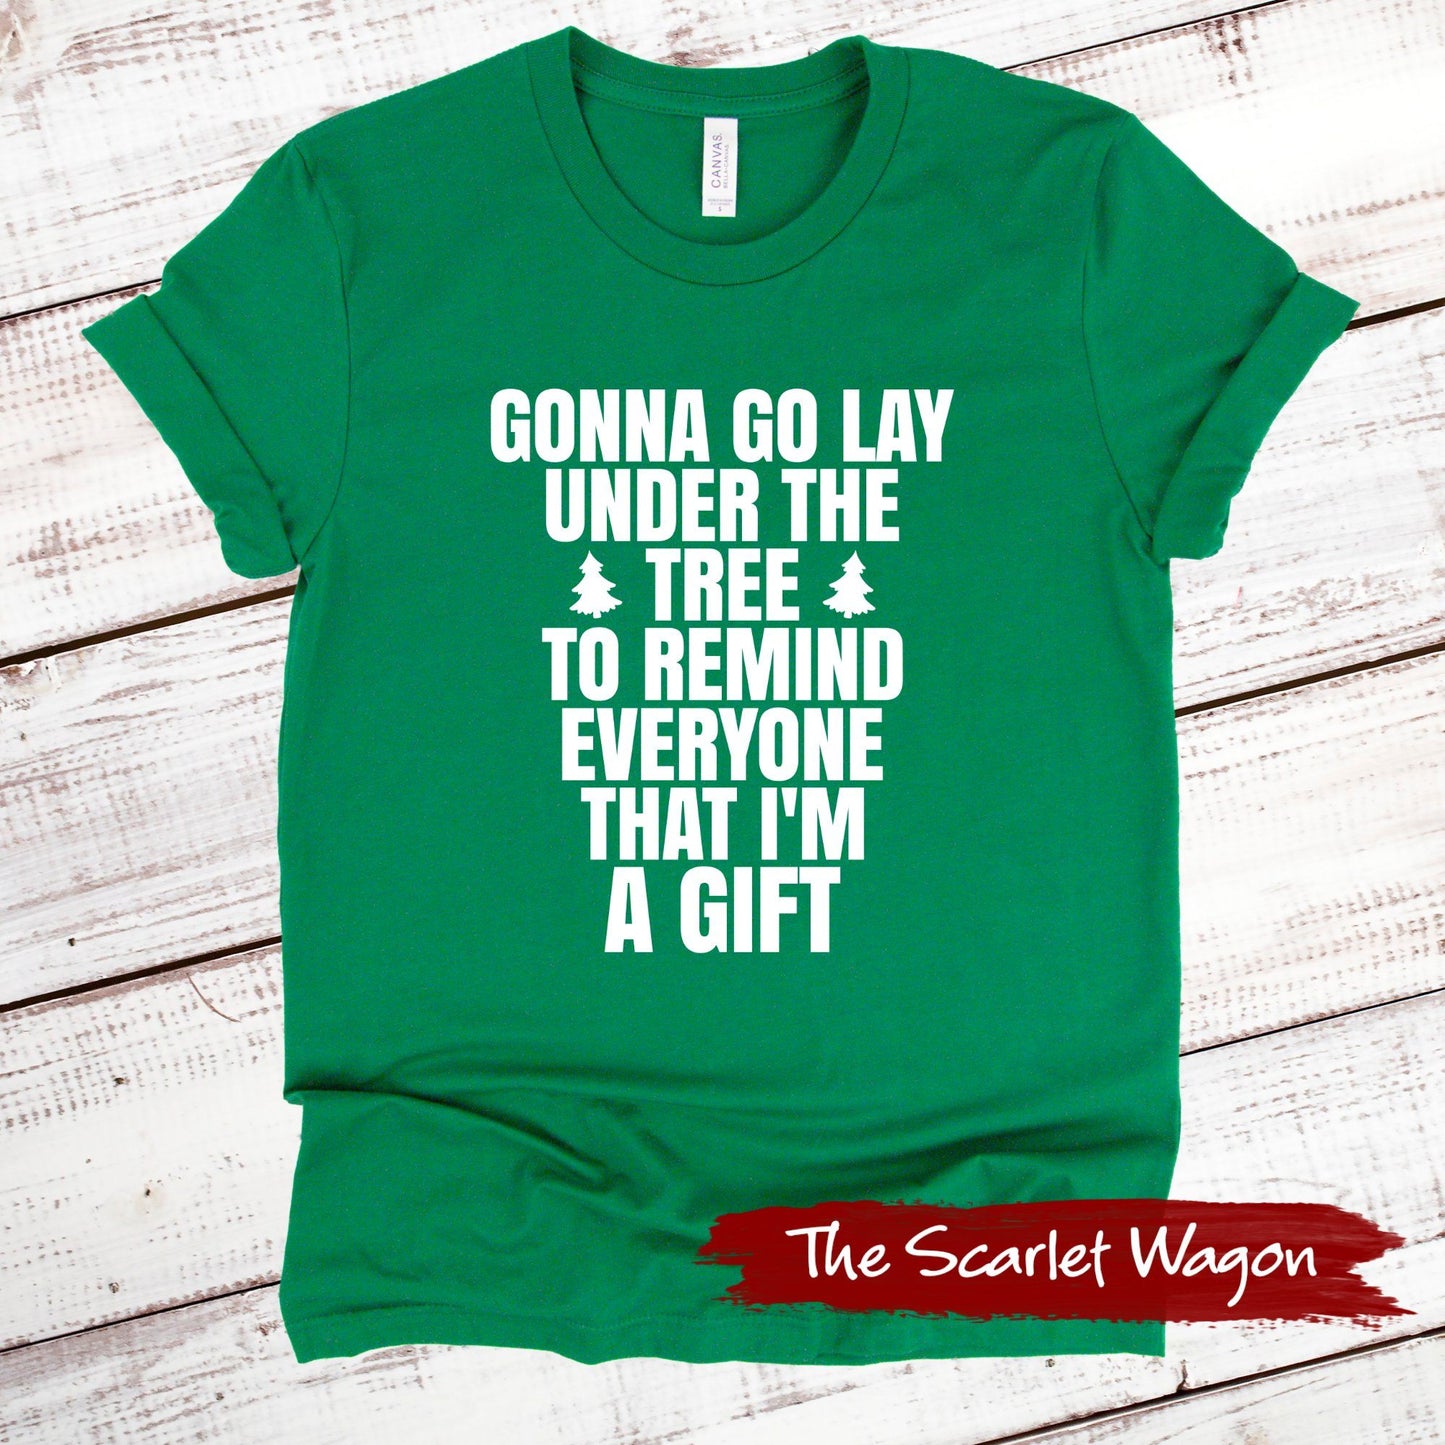 Gonna Go Lay Under the Tree Christmas Shirt Scarlet Wagon Green XS 